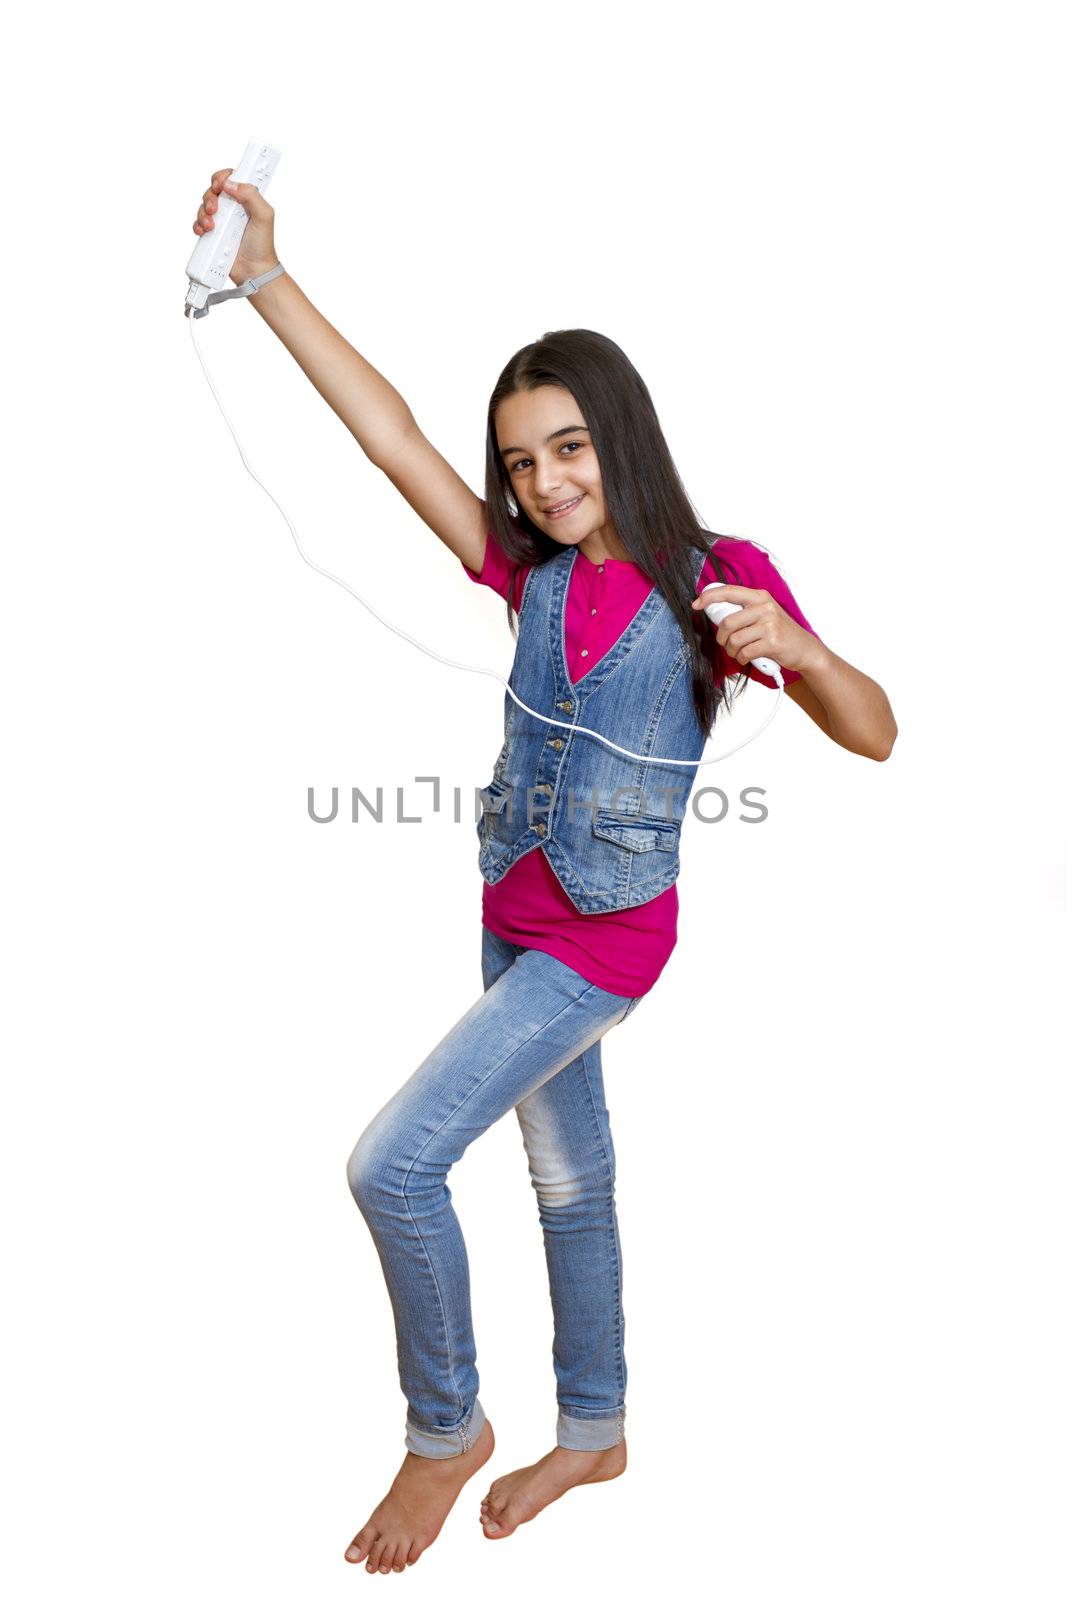 A teenage girl playing video game, isolated on white background